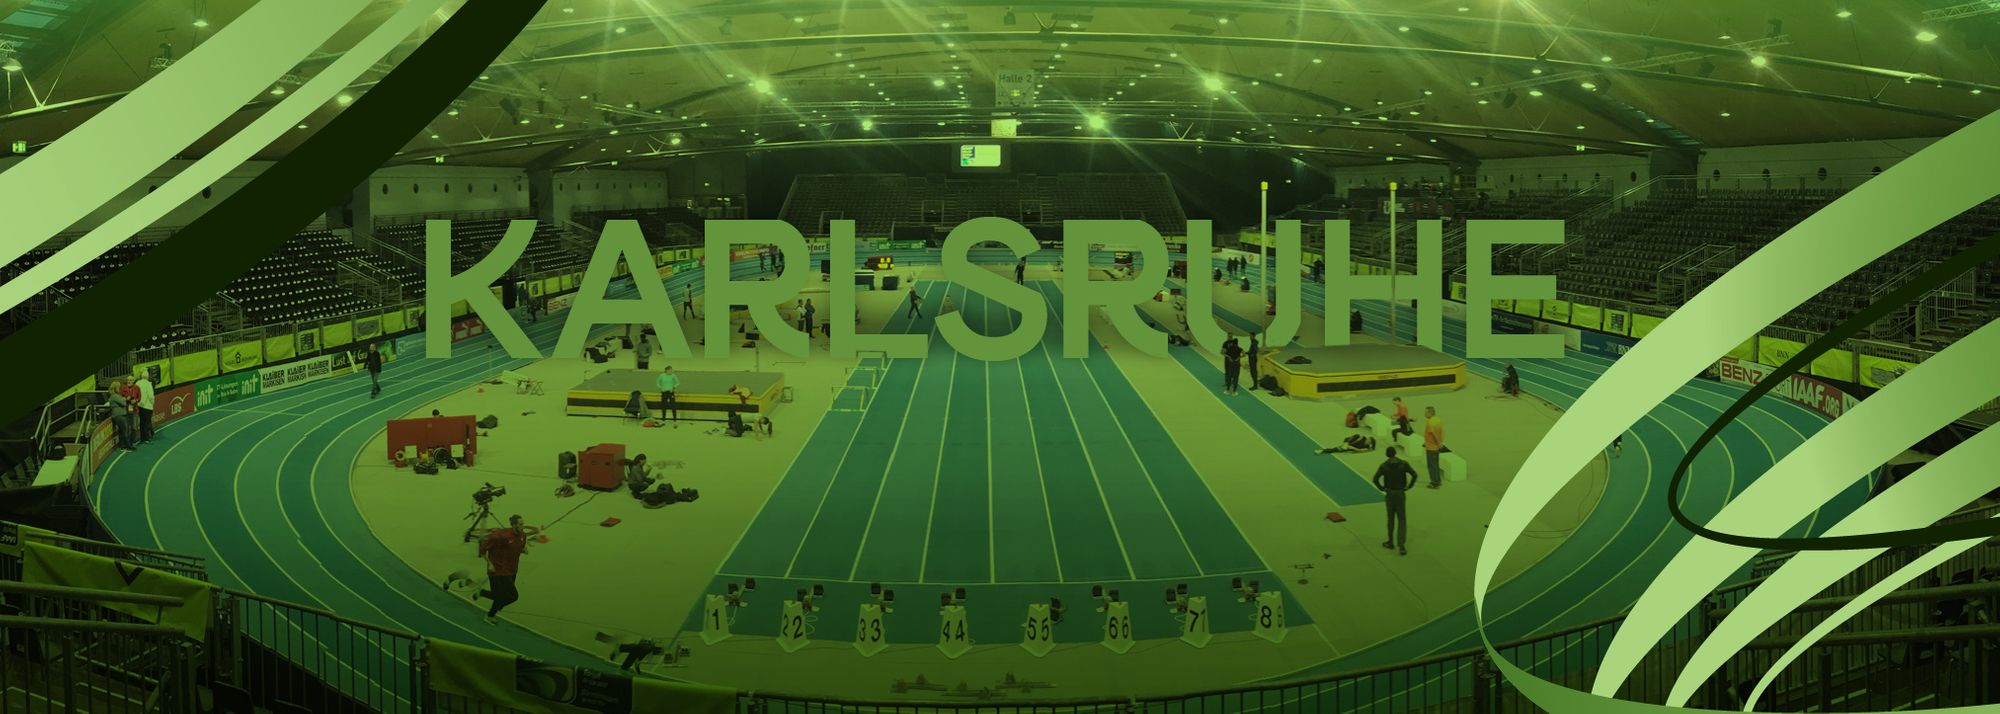 The 2022 World Athletics Indoor Tour Gold series kicks off on Friday with the INIT Indoor Meeting Karlsruhe.